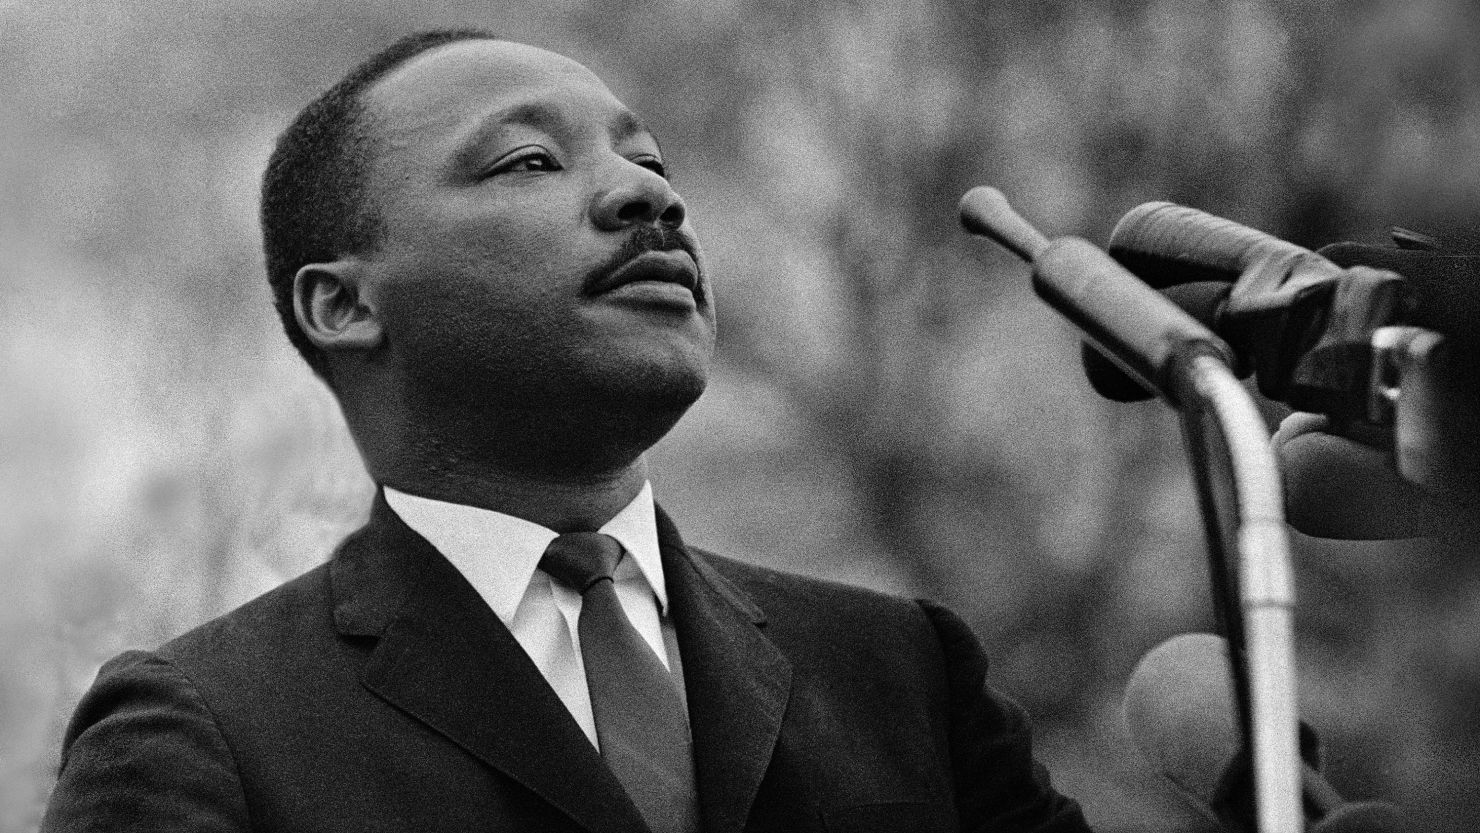 MONTGOMERY, AL - MARCH 25:  Dr Martin Luther King Jr speaking before crowd of 25,000 Selma To Montgomery, Alabama civil rights marchers, in front of Montgomery, Alabama state capital building. On March 25, 1965 in Montgomery, Alabama. (Photo by Stephen F. Somerstein/Getty Images)